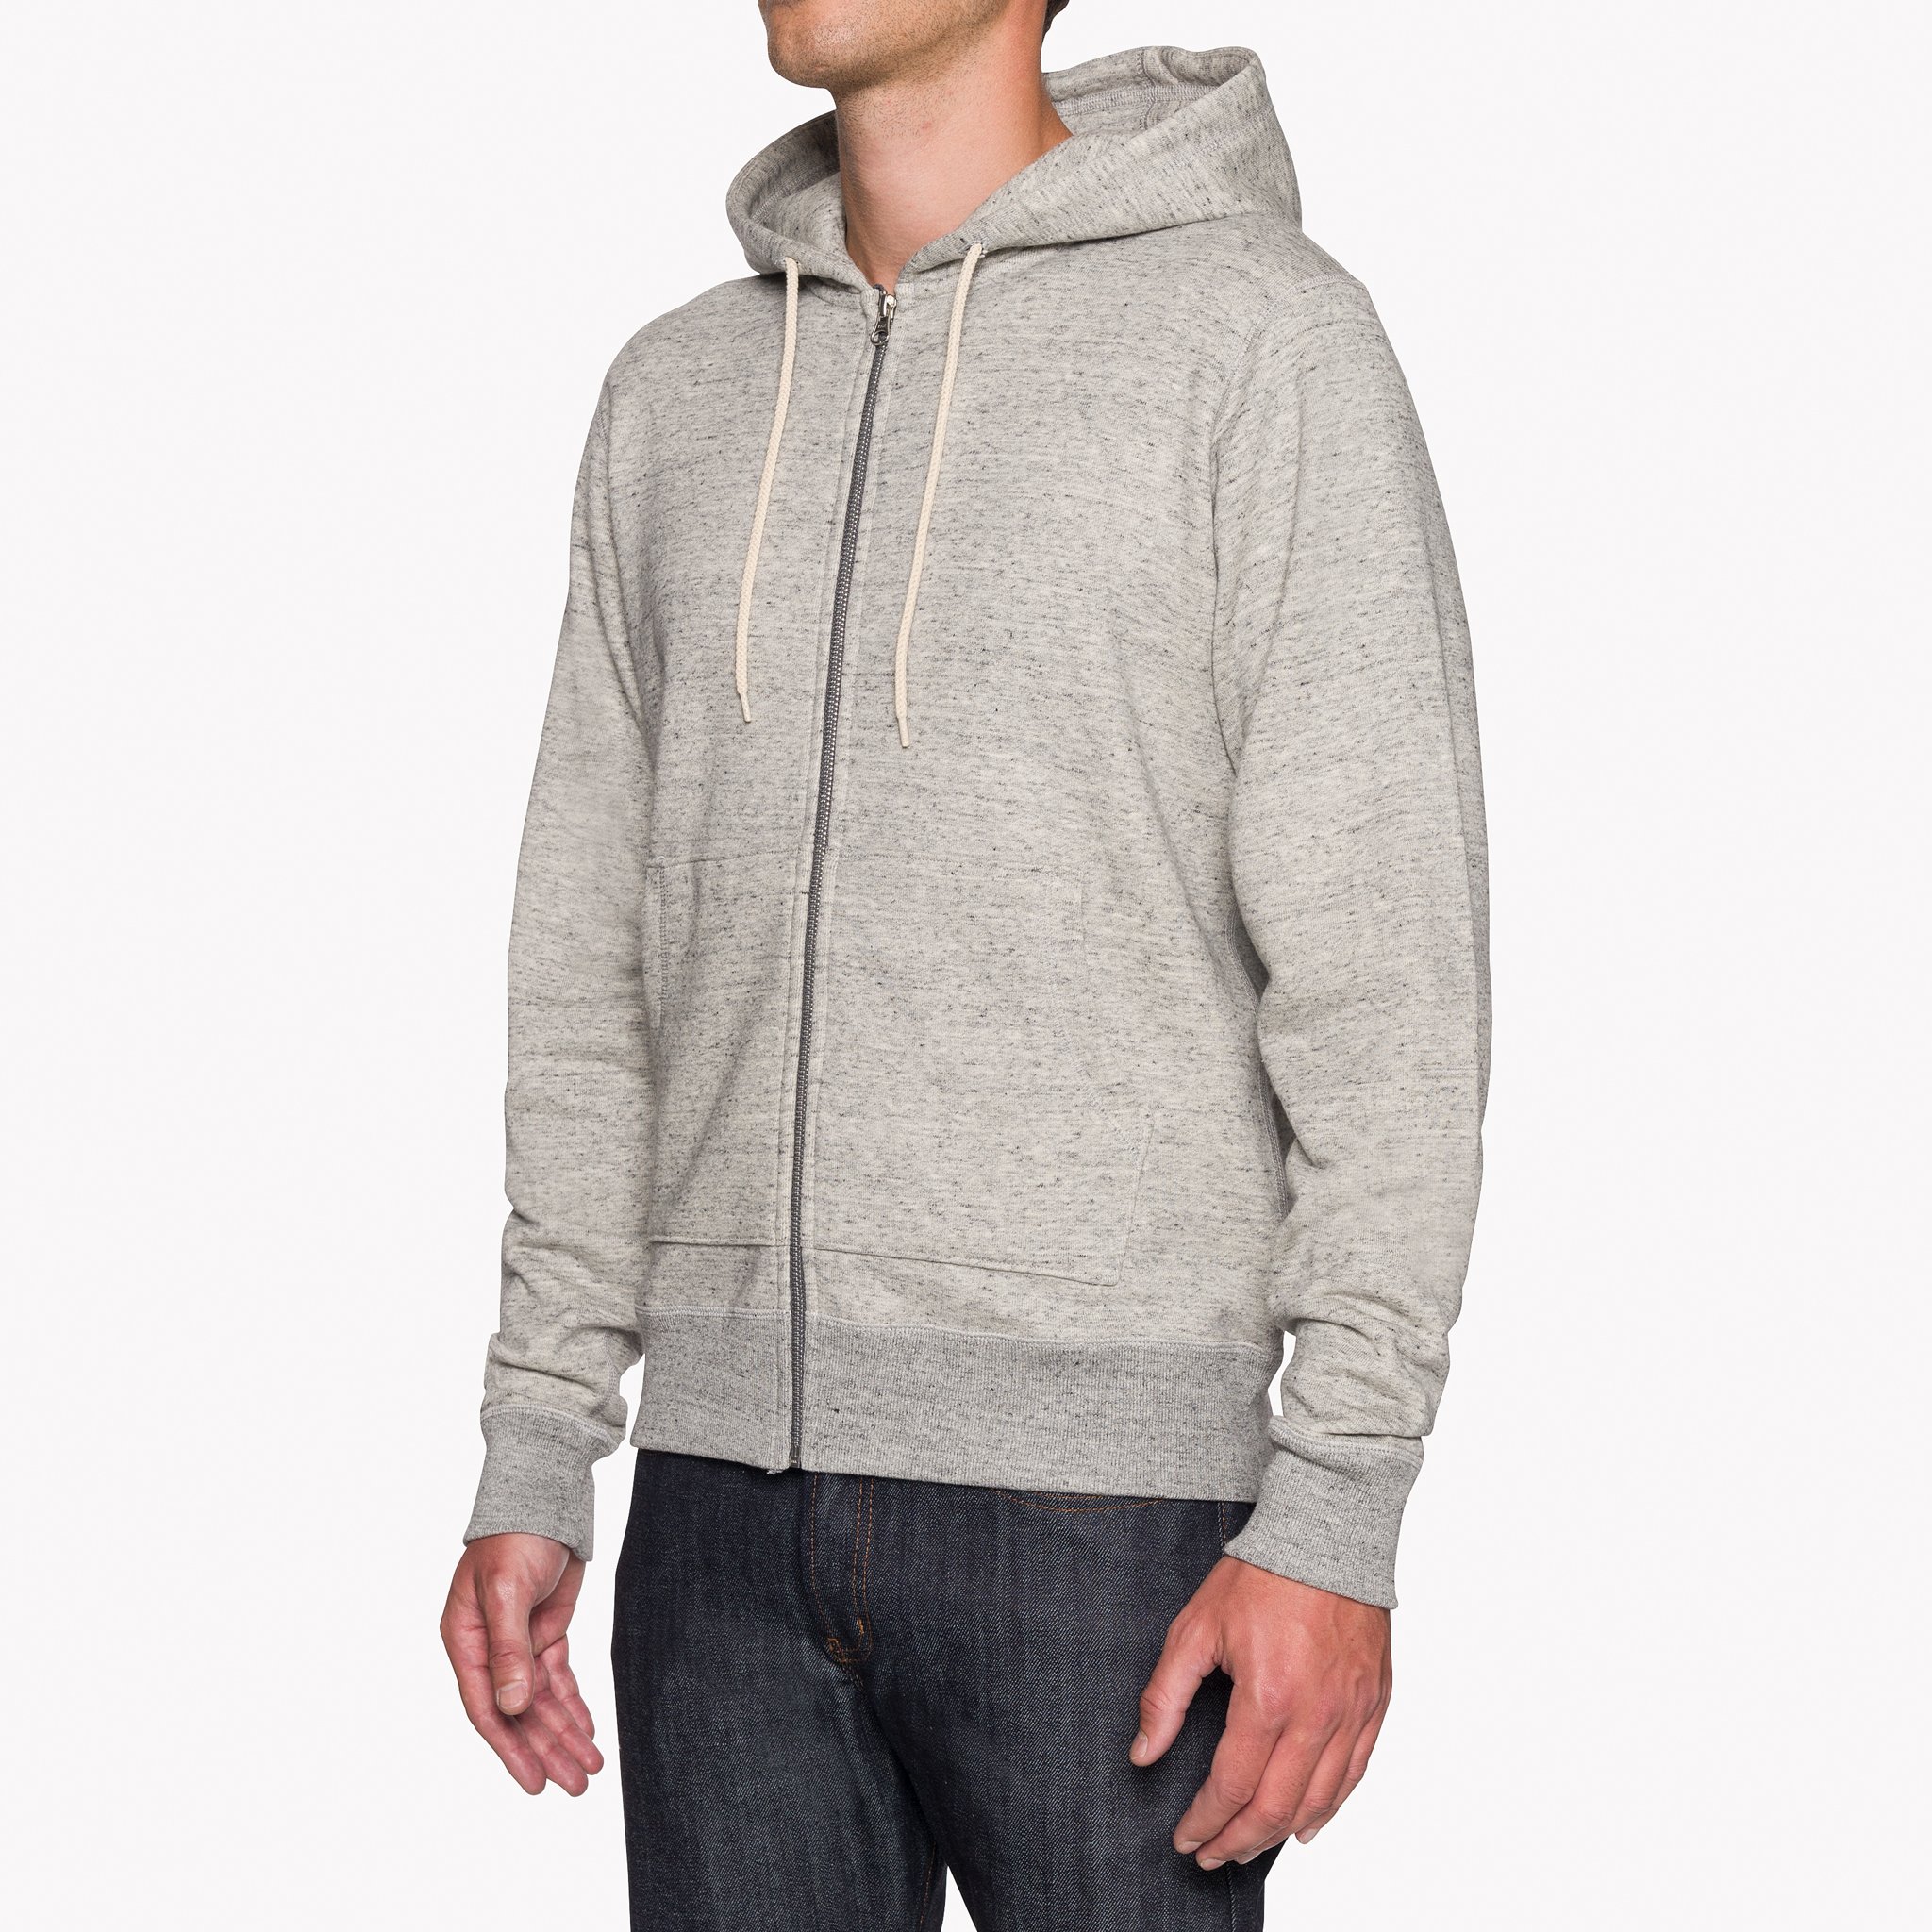  Zip Hoodie - French Terry - Grey 